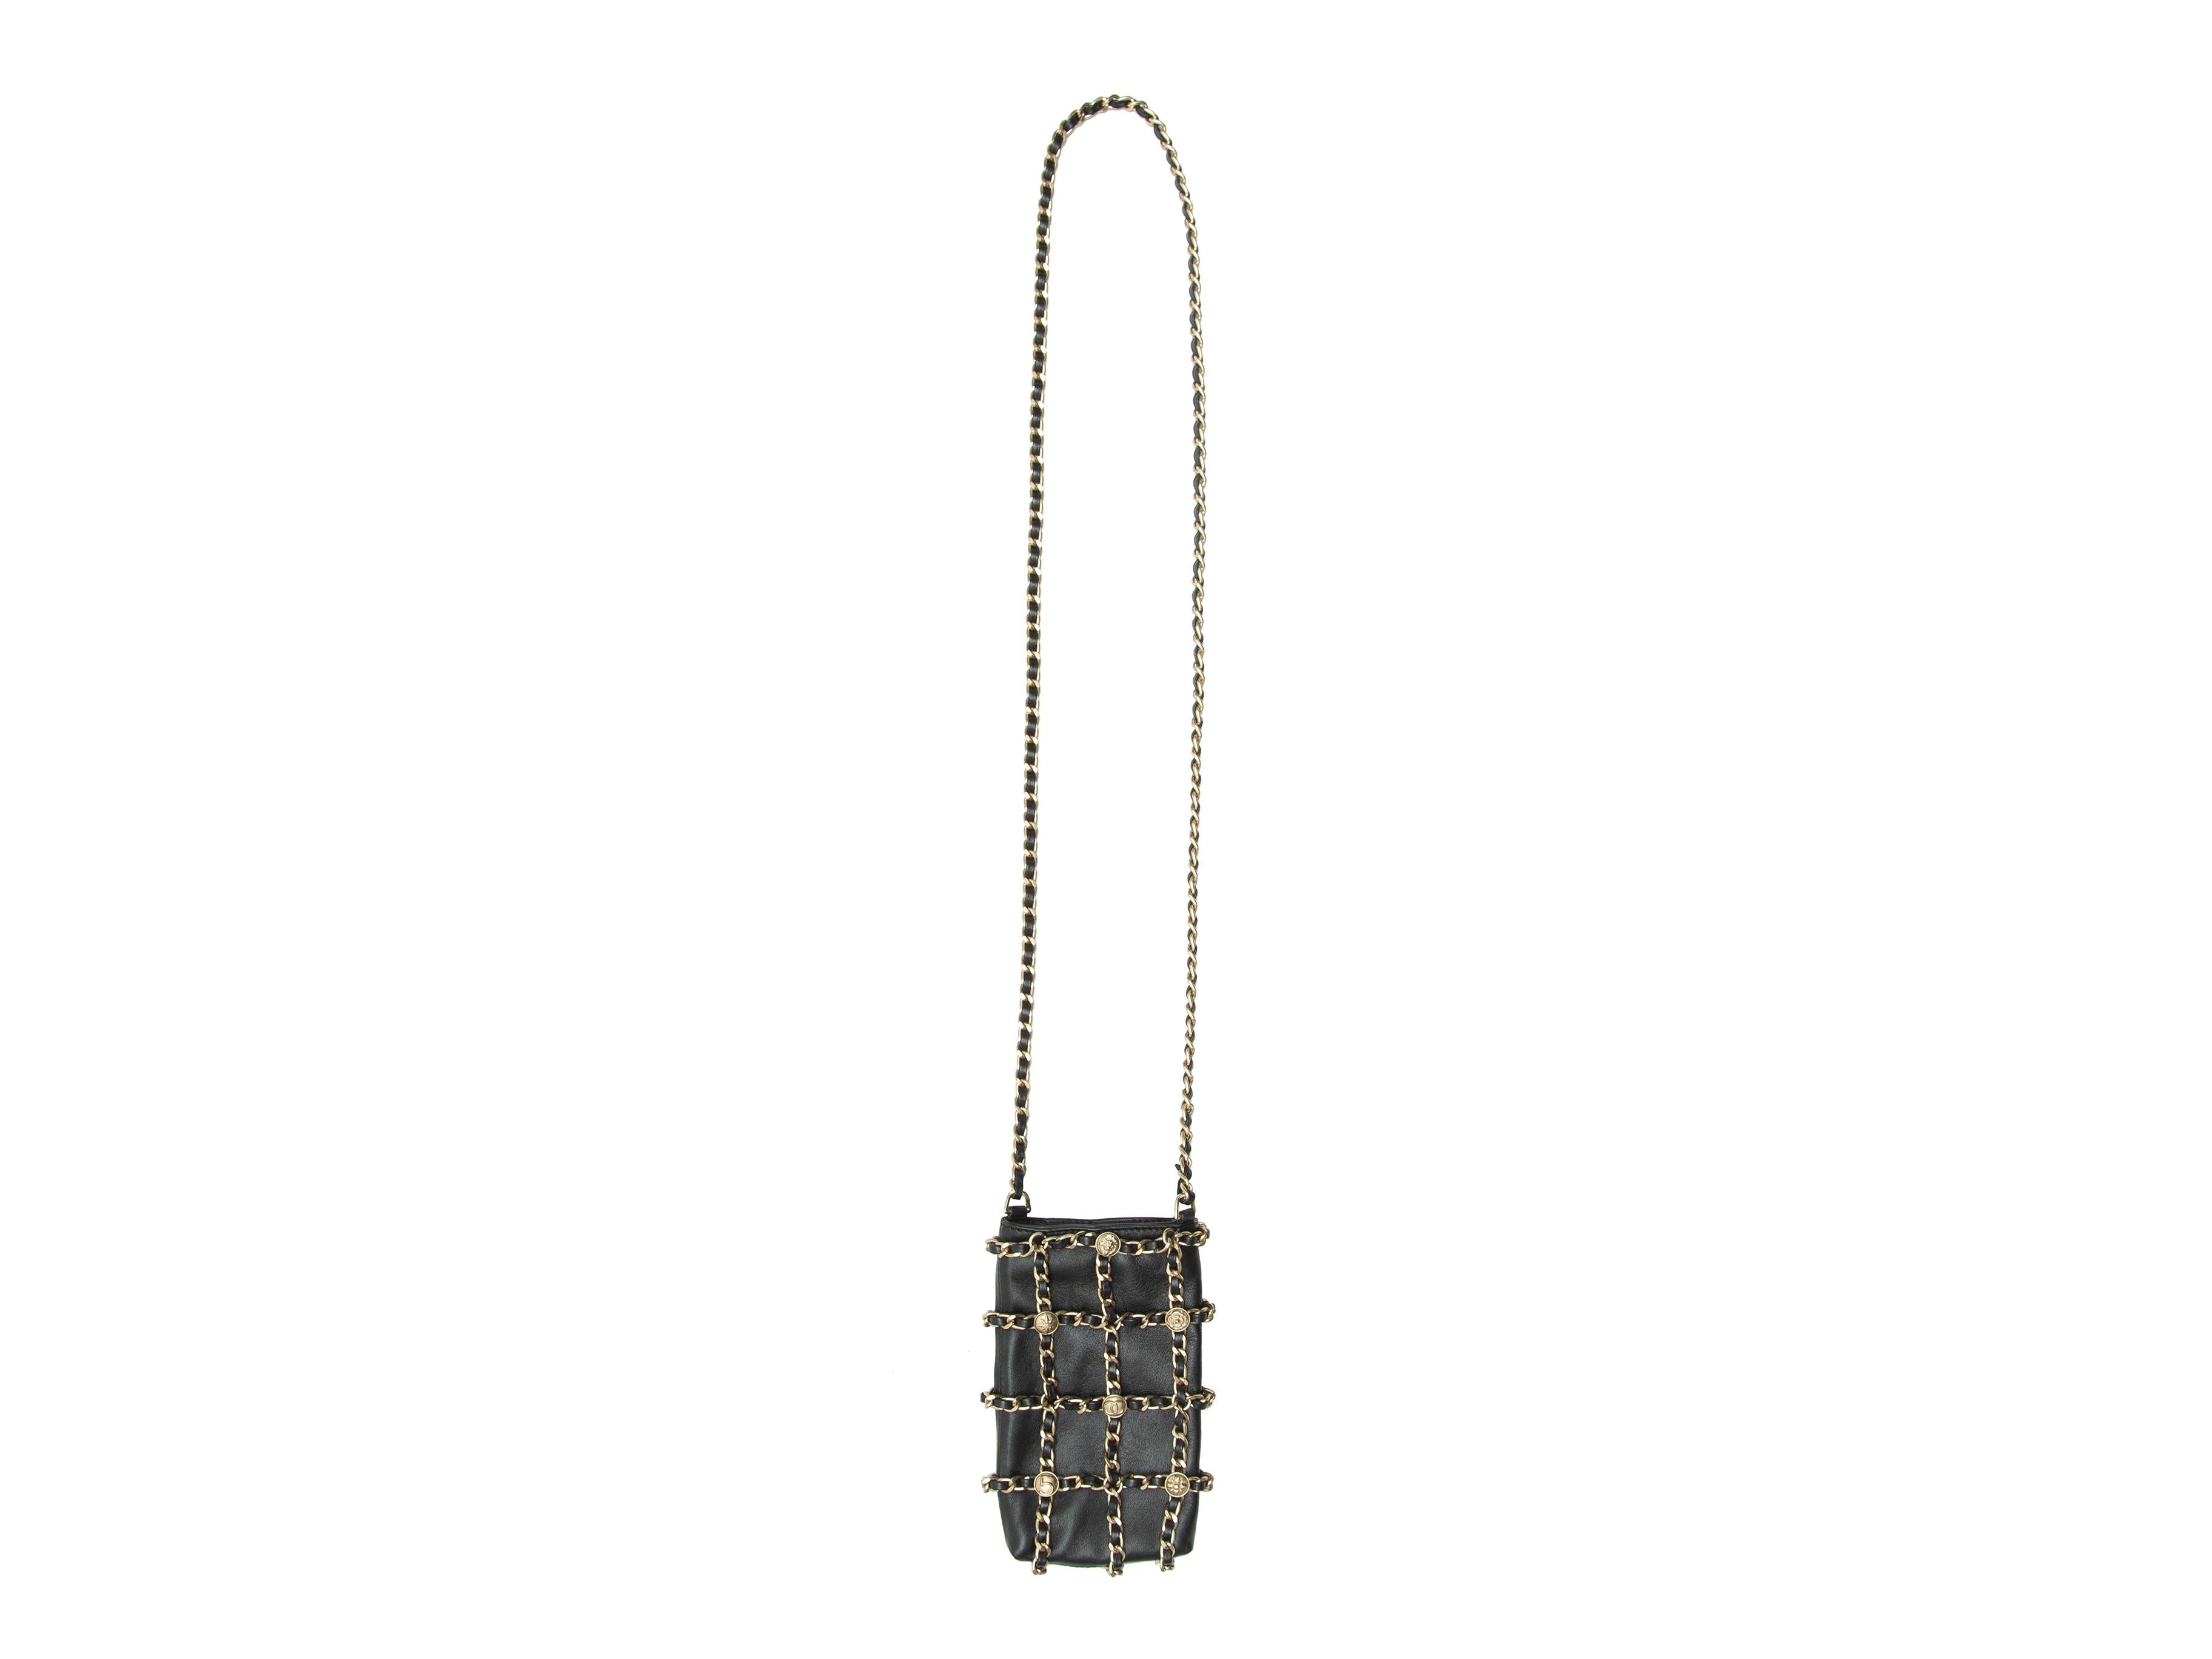 Women's Chanel Black Leather & Chain-Link Phone Bag